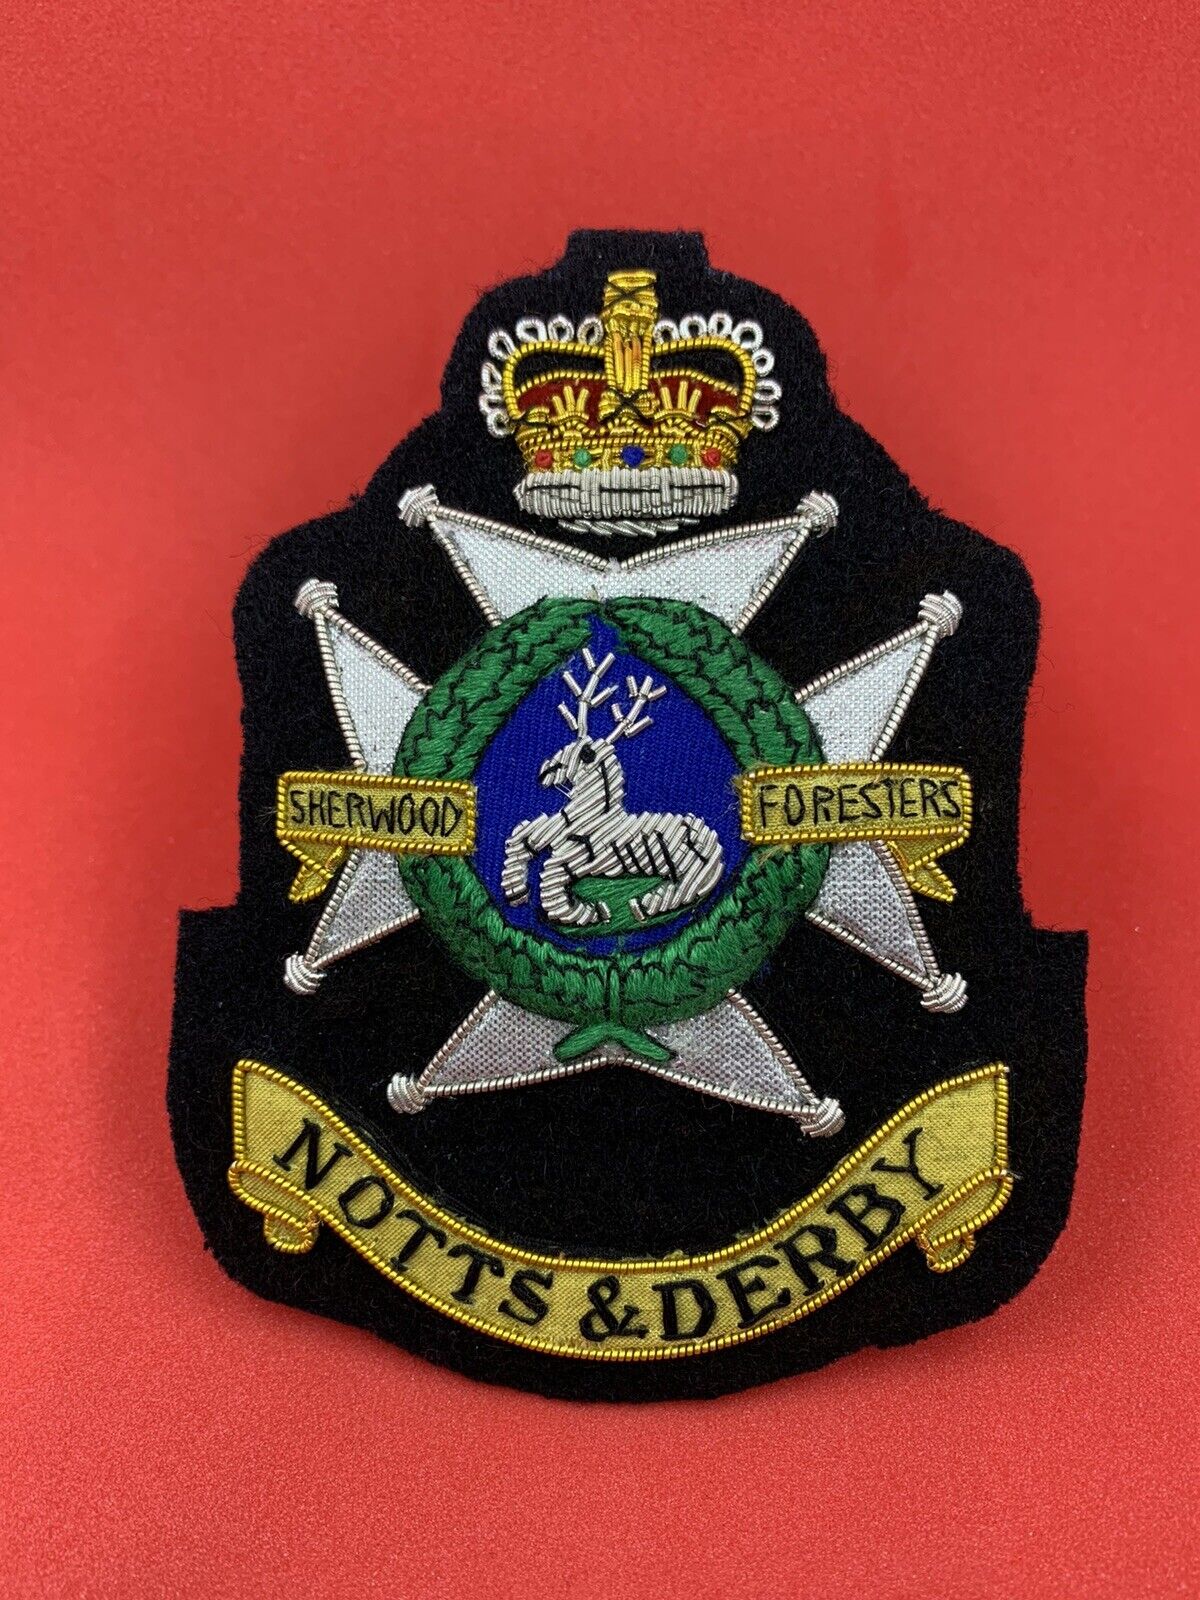 SHERWOOD FORESTERS (NOTTS AND DERBY) BLAZER BADGE BULLION AND WIRE BLAZER BADGE